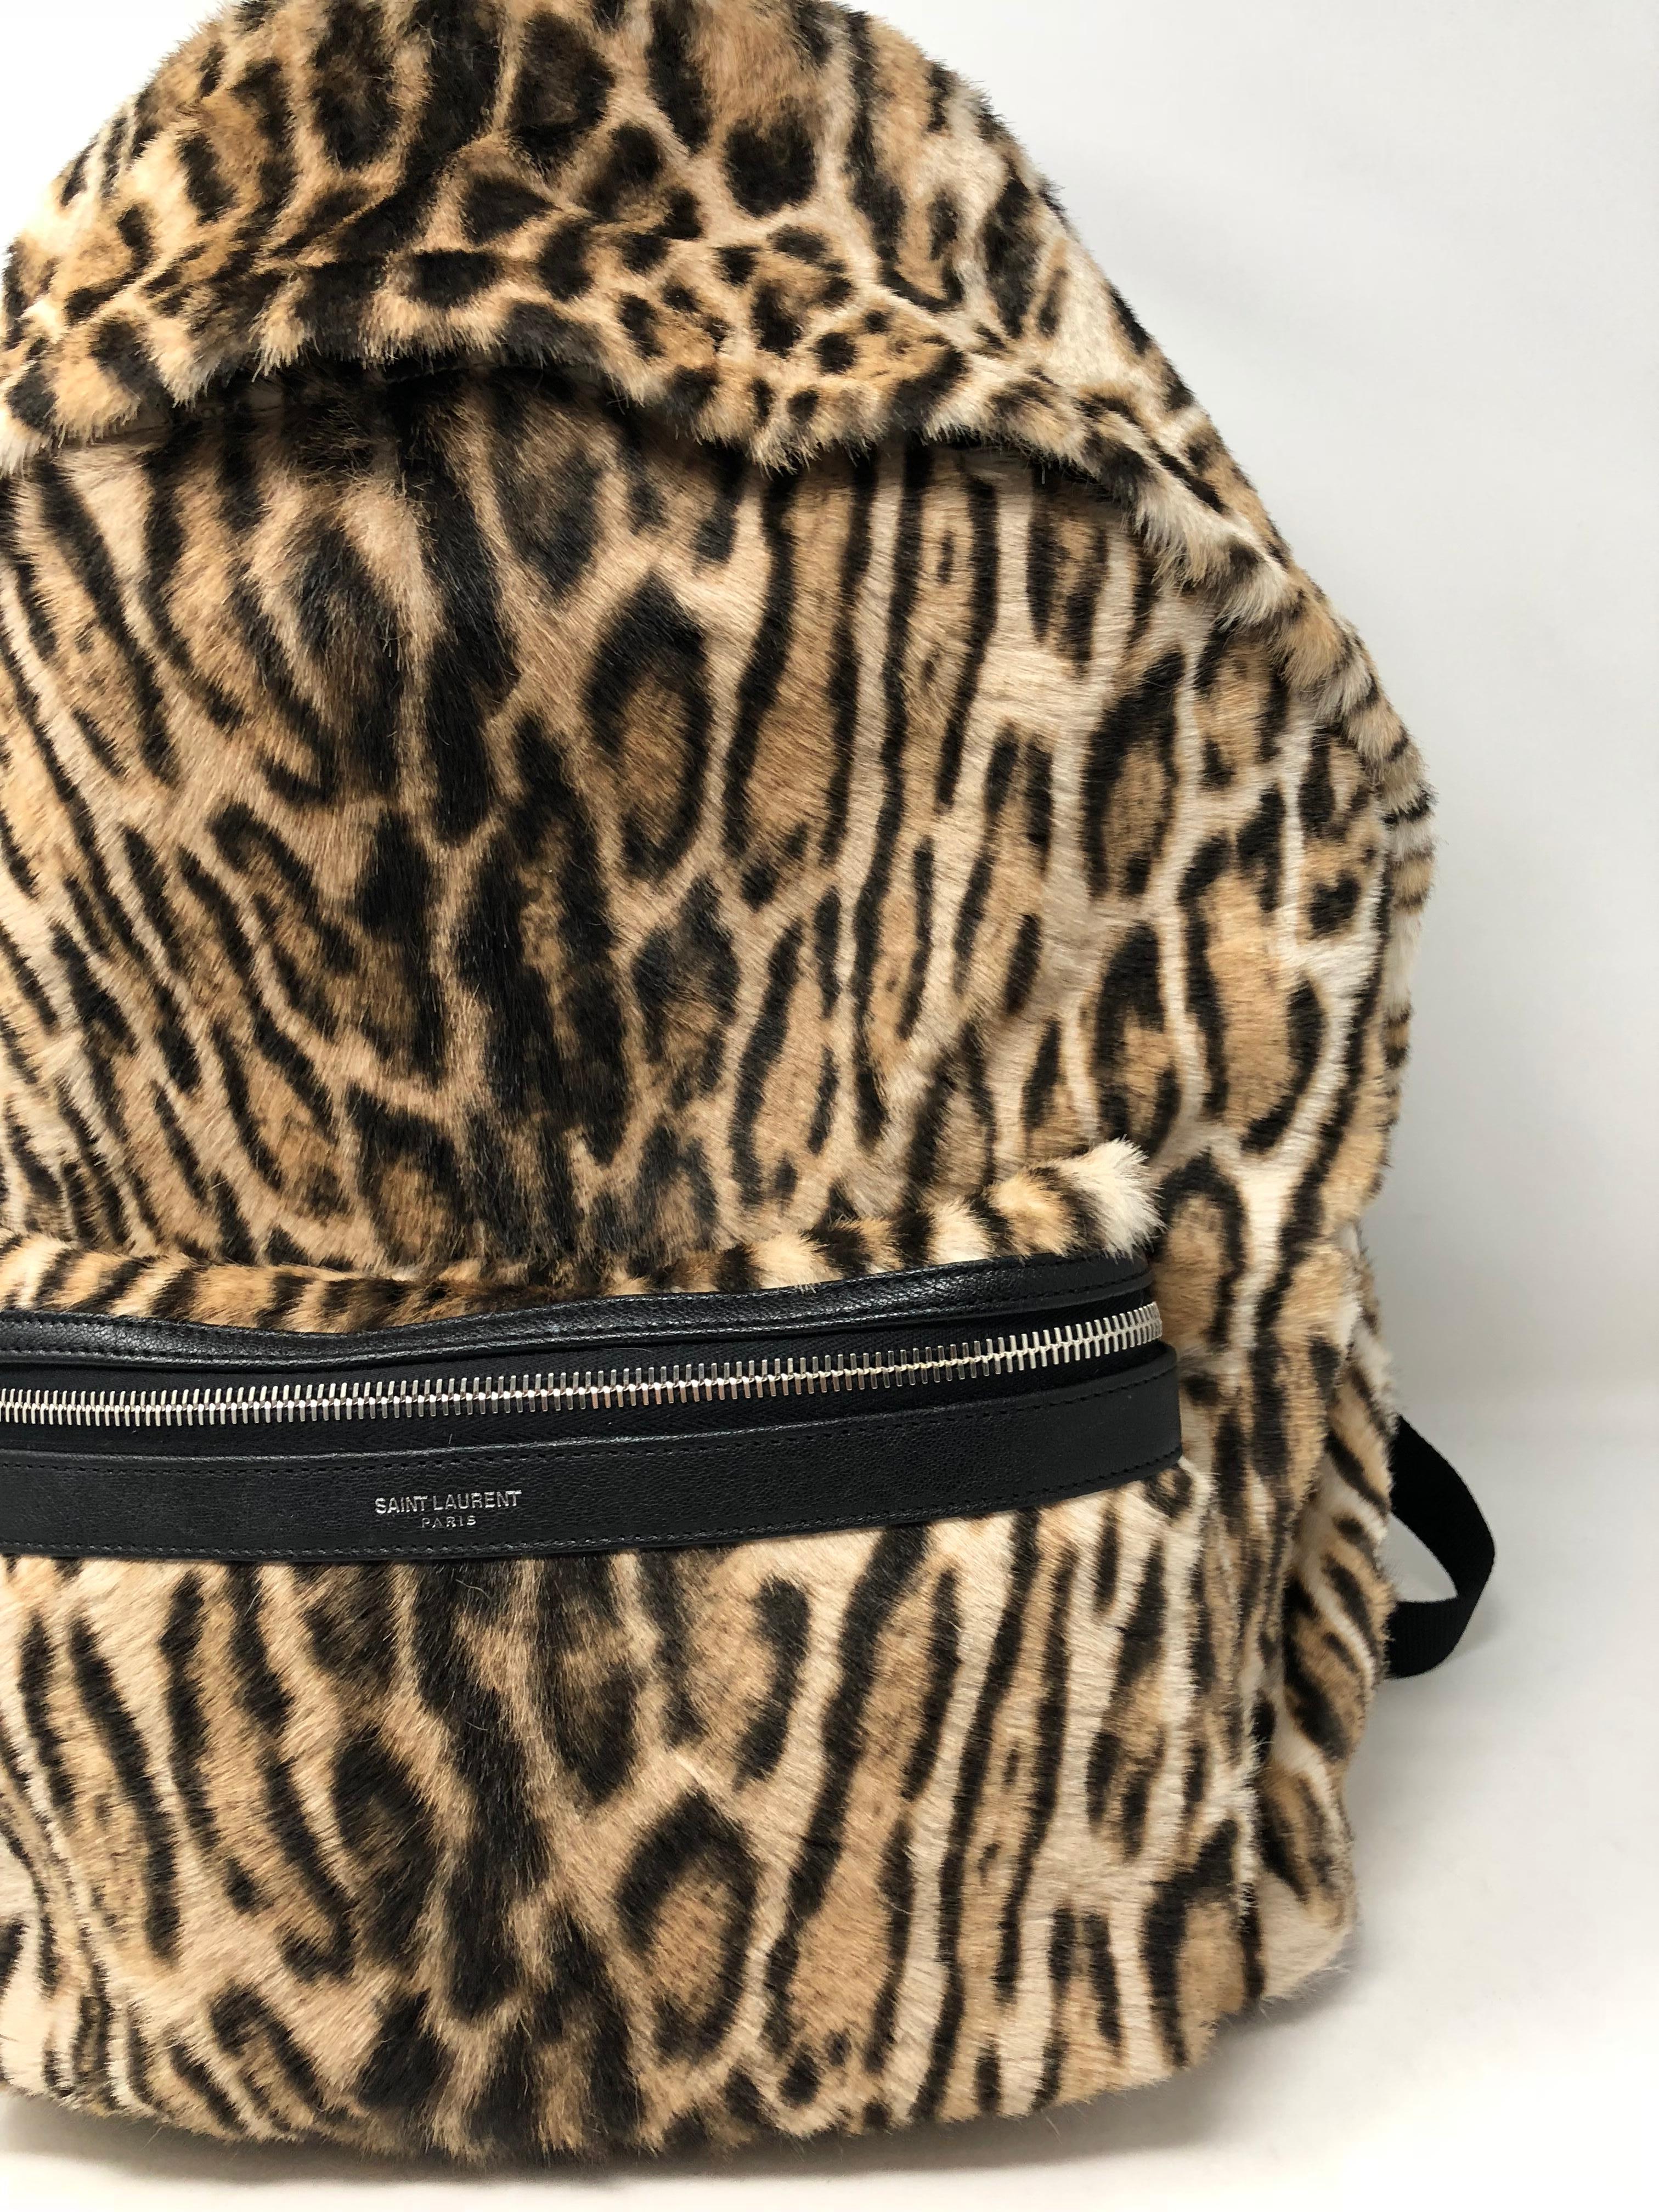 Yves Saint Laurent Big backpack in leopard style fur. Just purchased this year. Retail with tax over $3500. Roomy size backpack with leopard print on fur. Like new condition. Used only on a few photoshoots. Clean interior. Includes original YSL dust